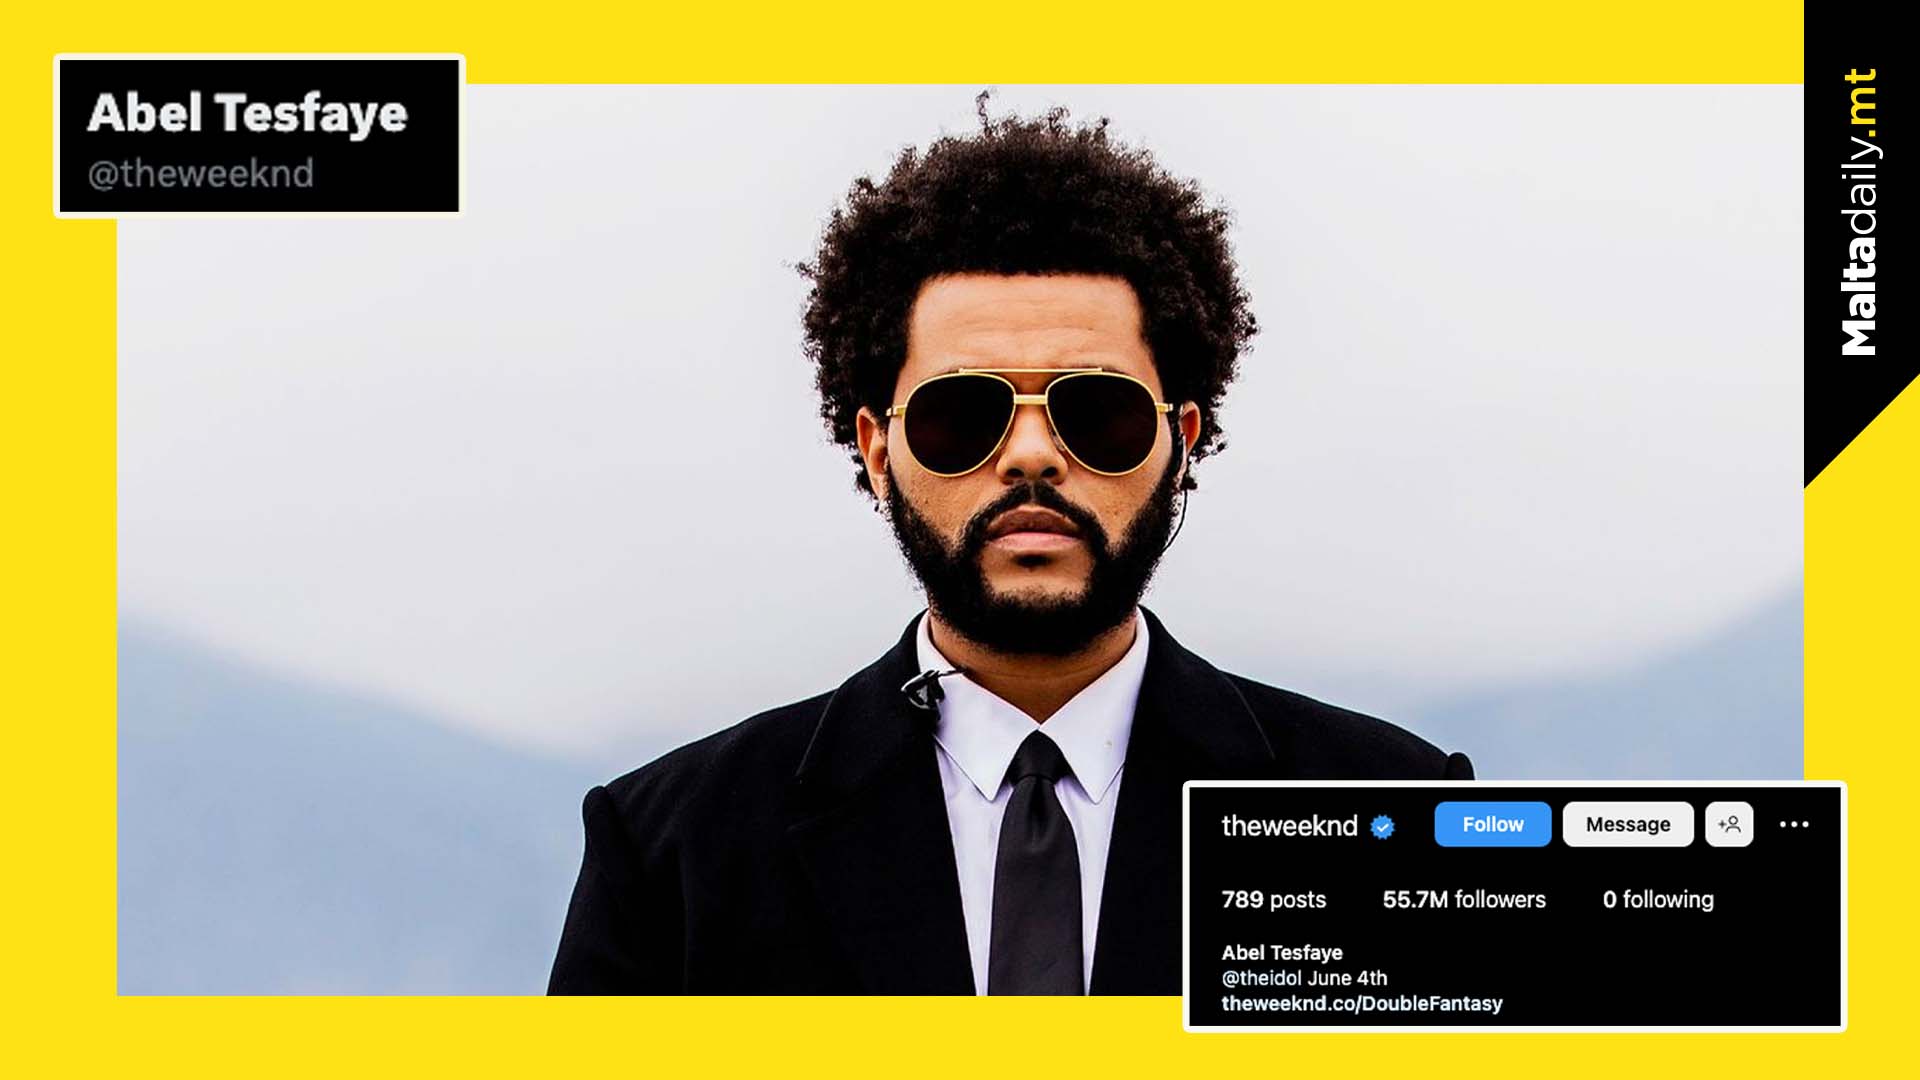 The Weeknd changes his stage name back to Abel Tesfaye